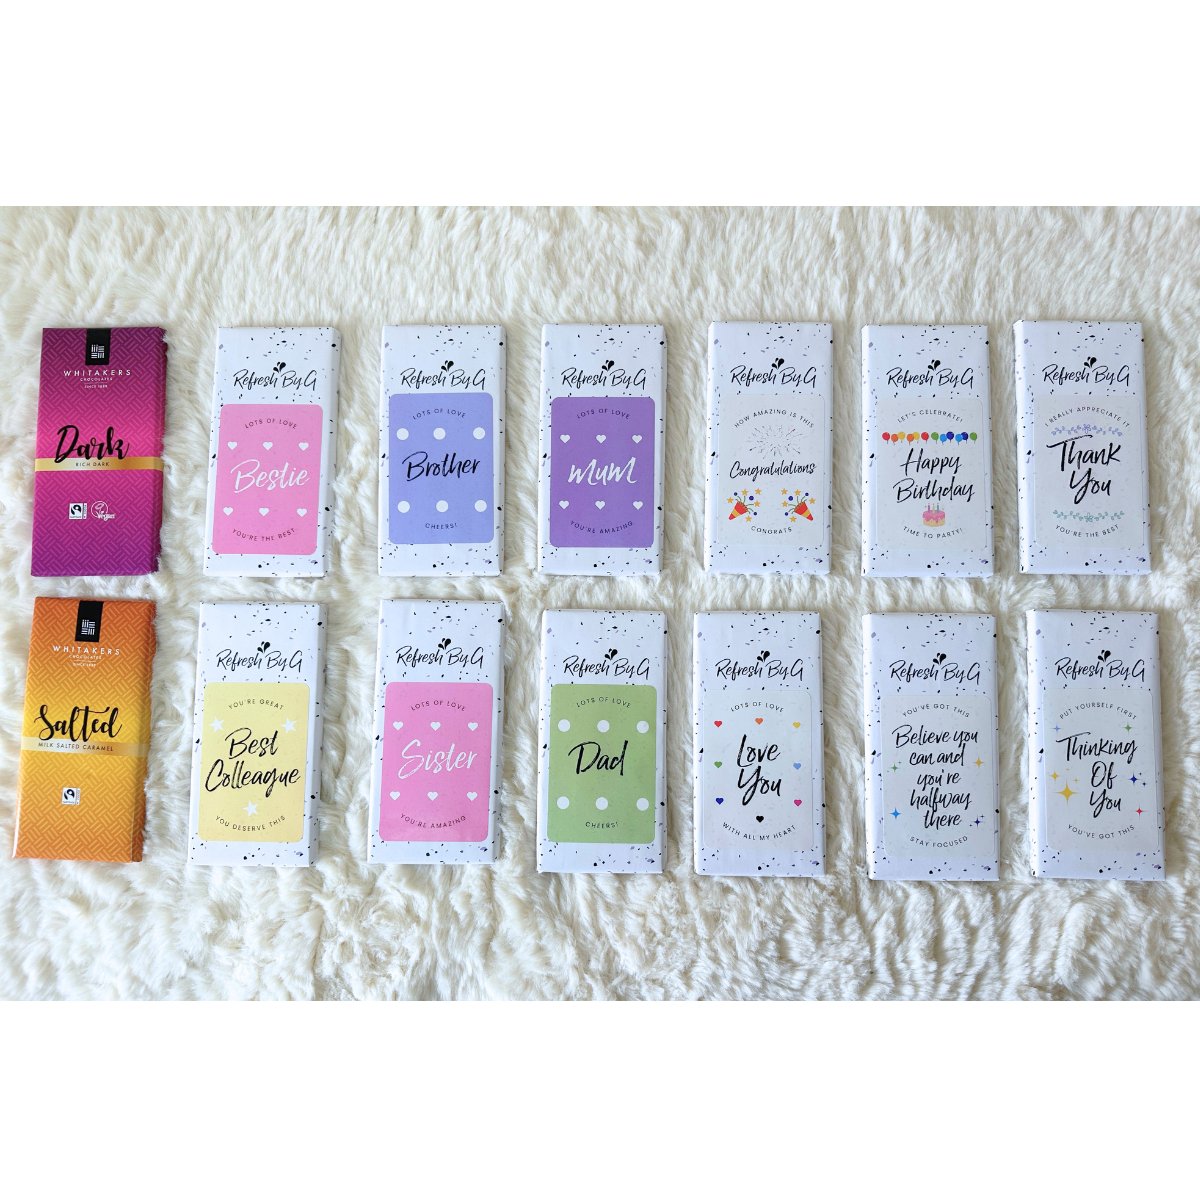 Range of chocolate bars which customers can choose from when they order the &